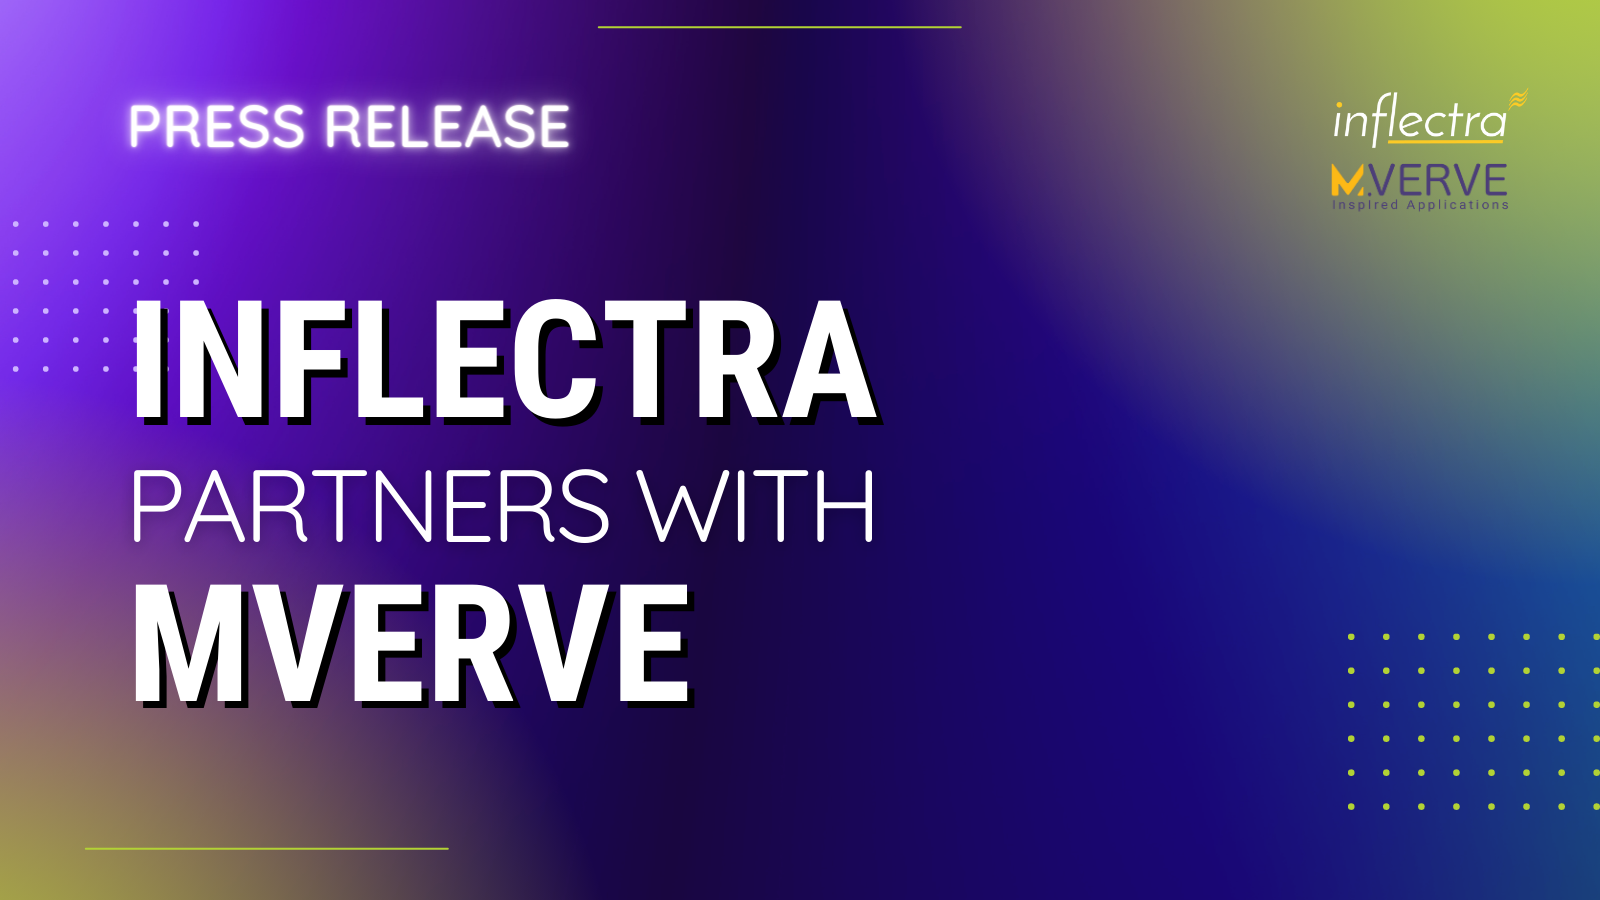 press-release-inflectra-partners-with-mverve-image